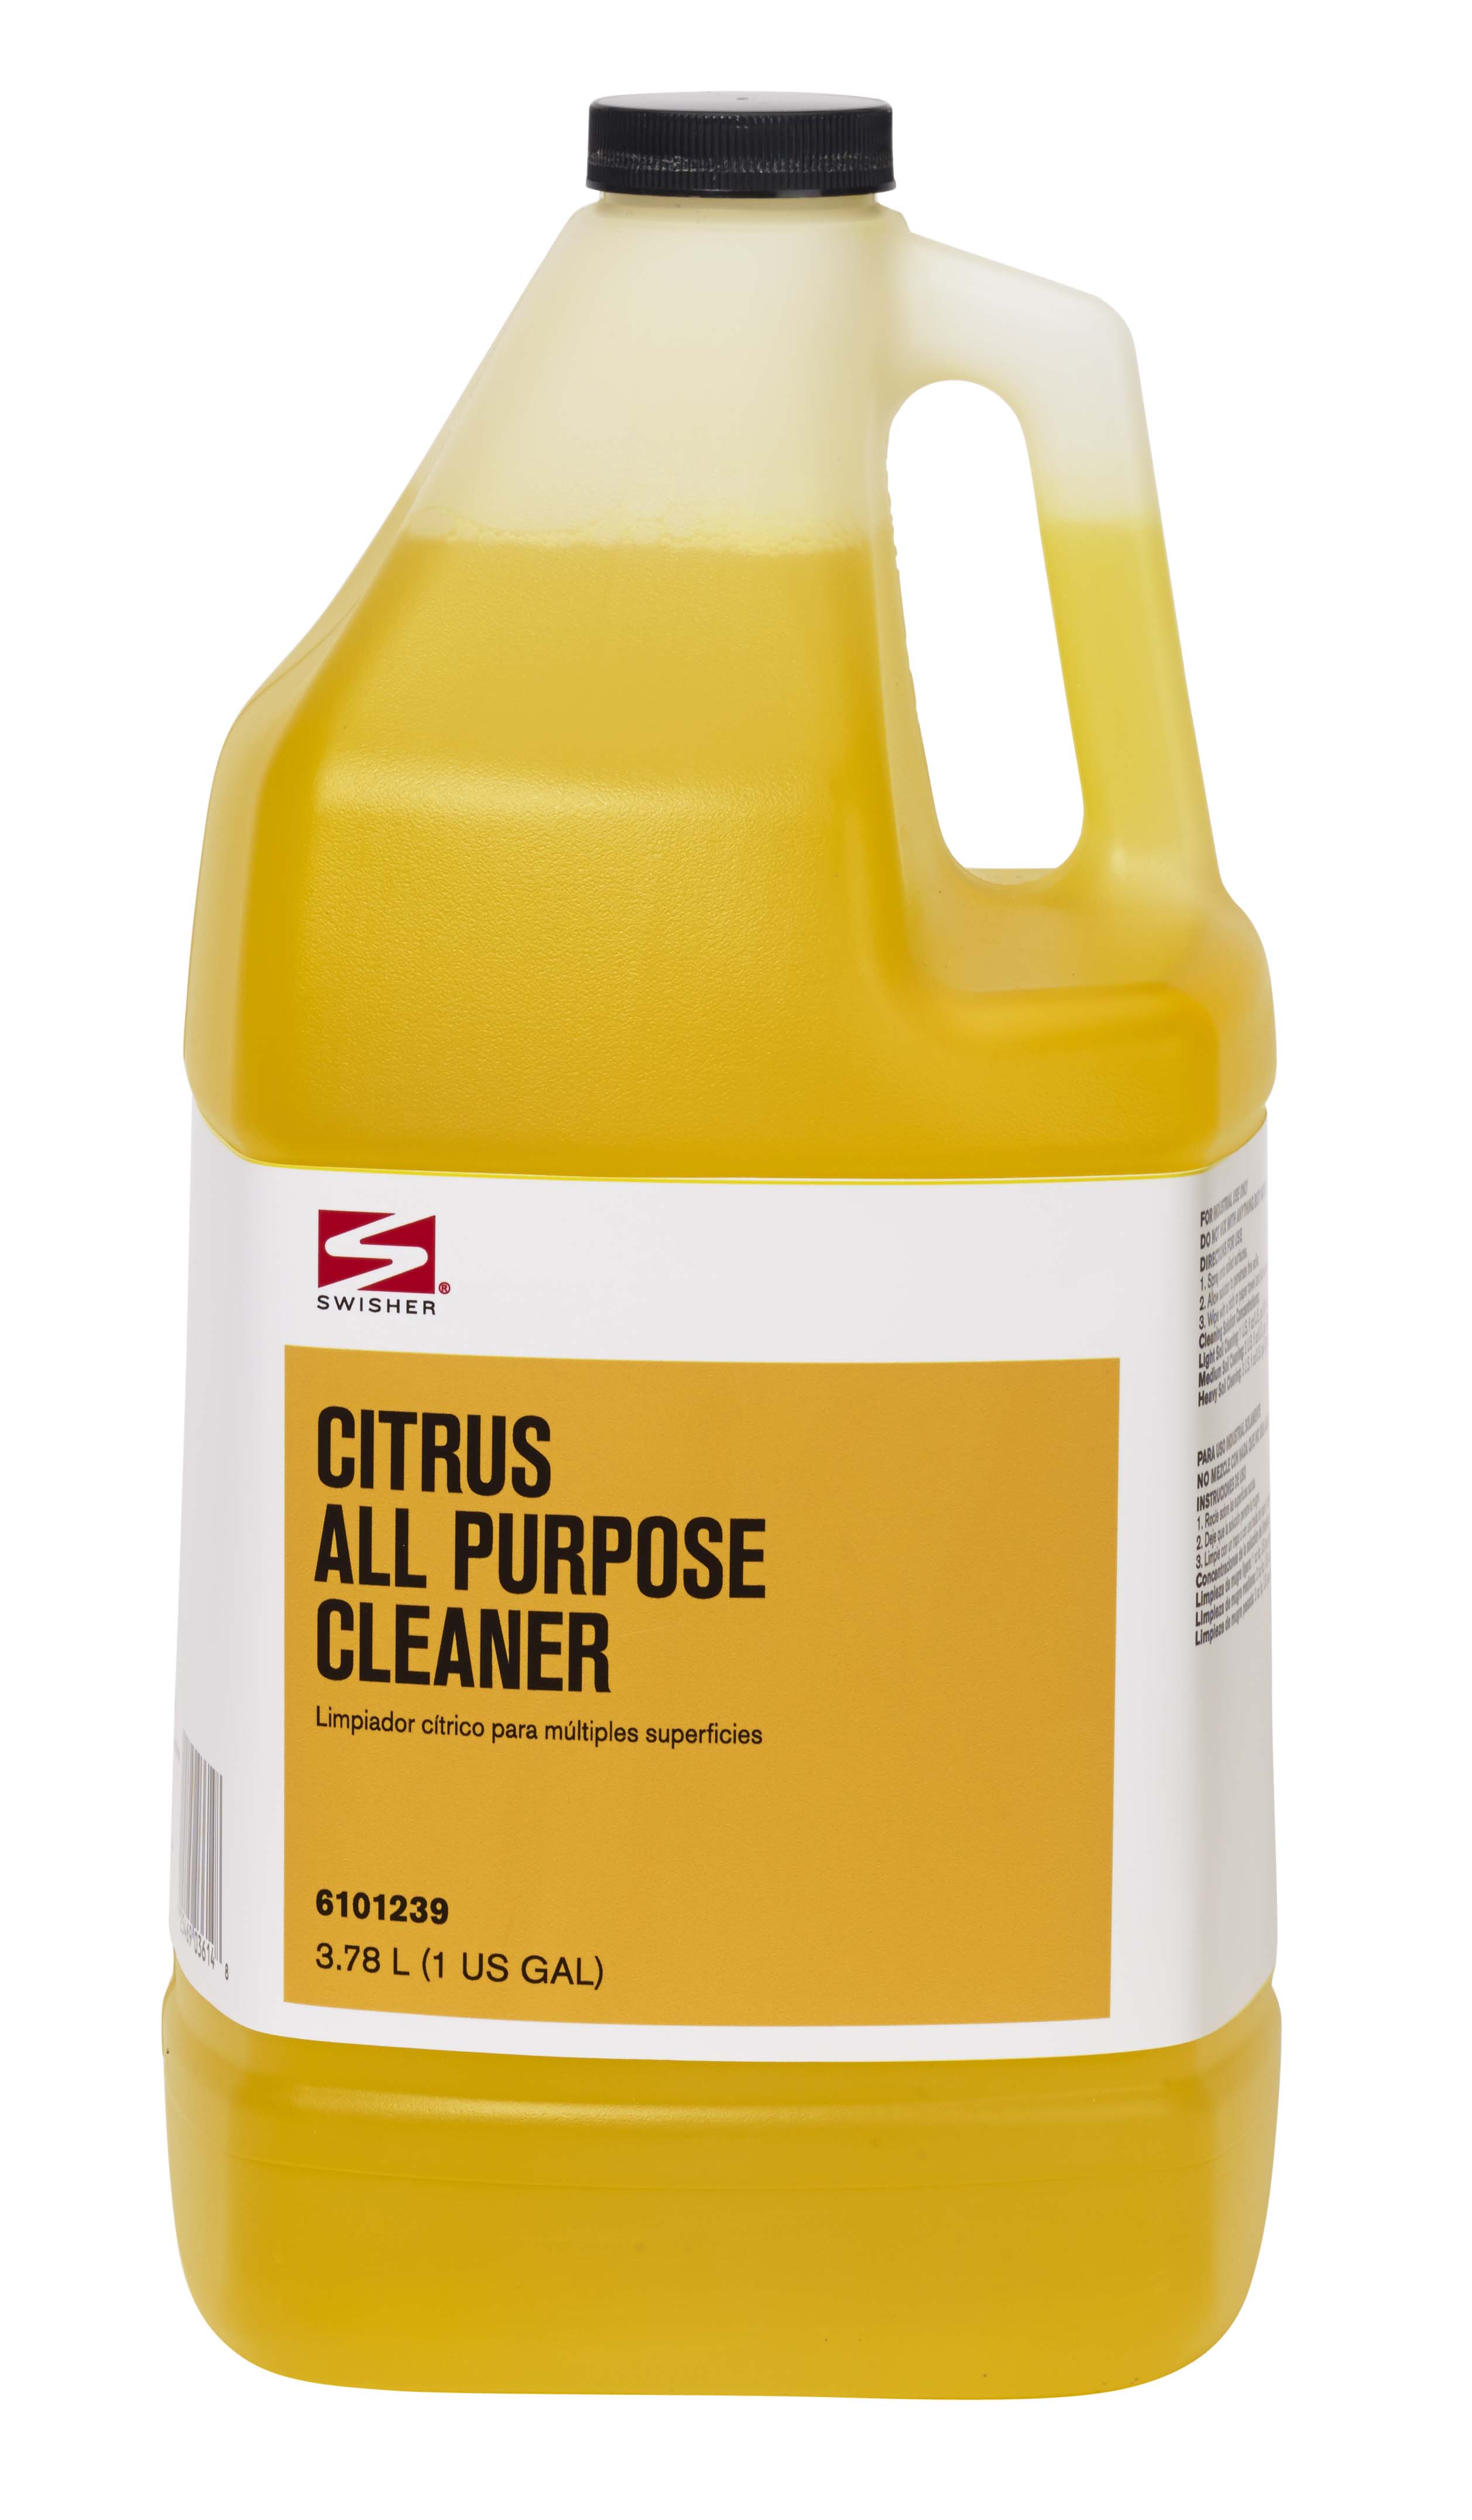 Goo Gone Citrus Power Cleaner - Shop All Purpose Cleaners at H-E-B